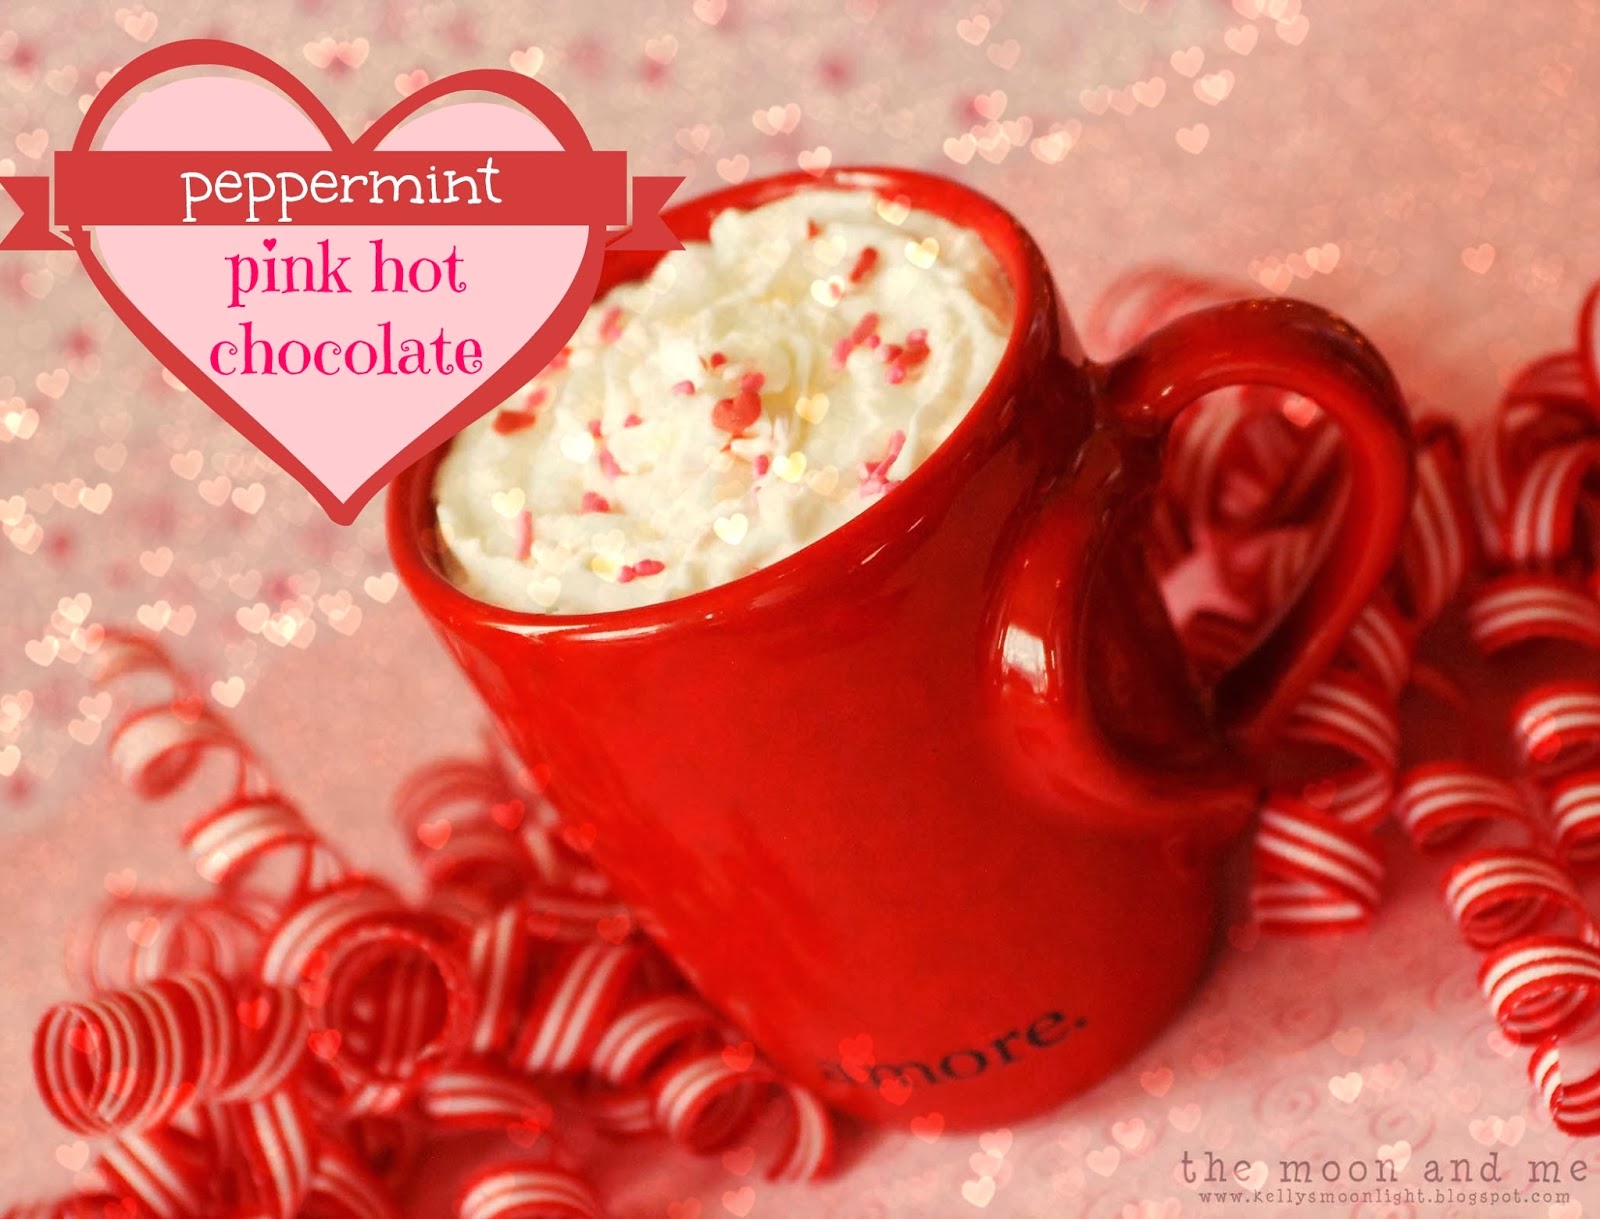 Peppermint Pink Hot Chocolate by The Moon and Me